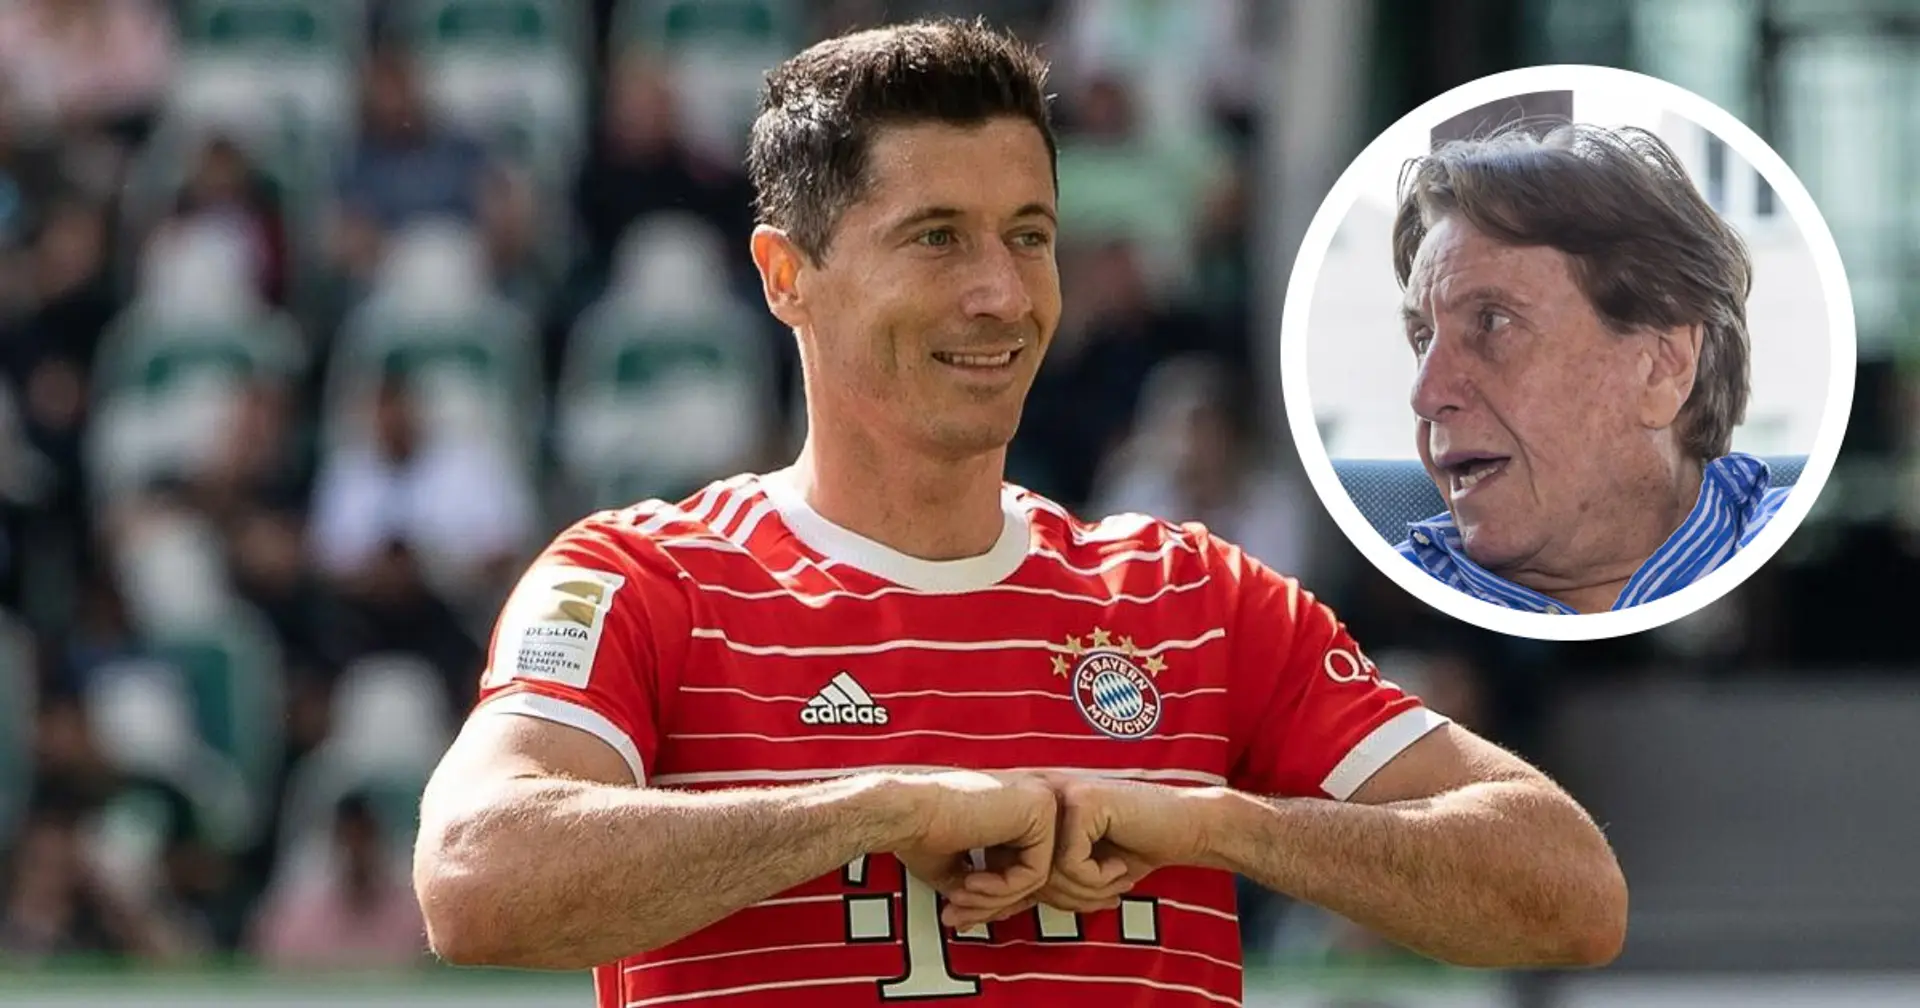 'He knows Bayern wanted to replace him with Haaland': Lewandowski's agent on why player wants summer exit